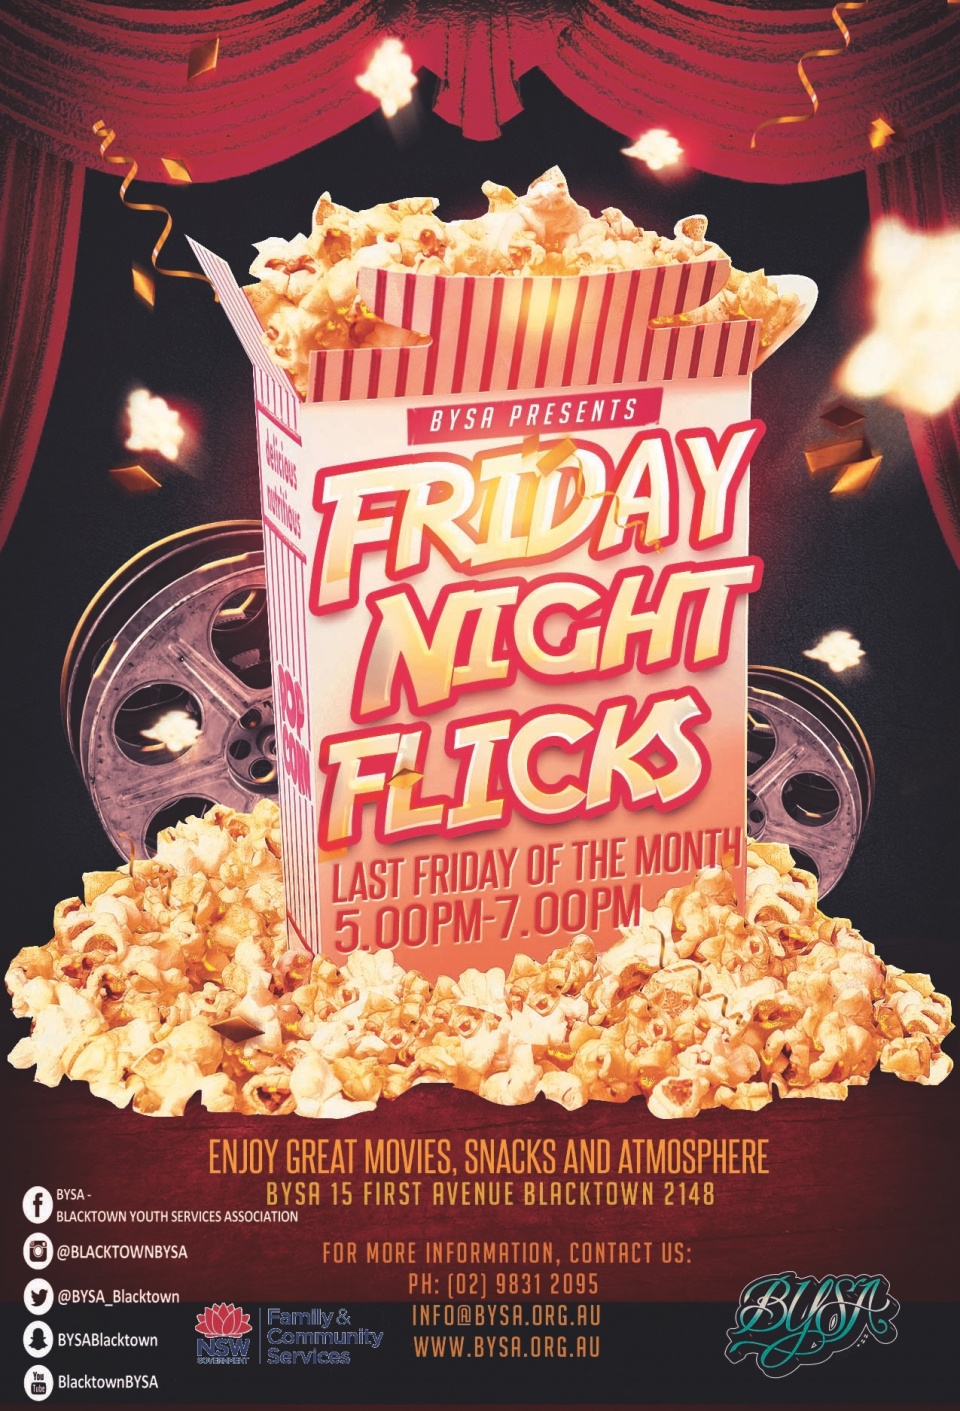 Friday Night Flicks. Popcorn provided! Come on down.